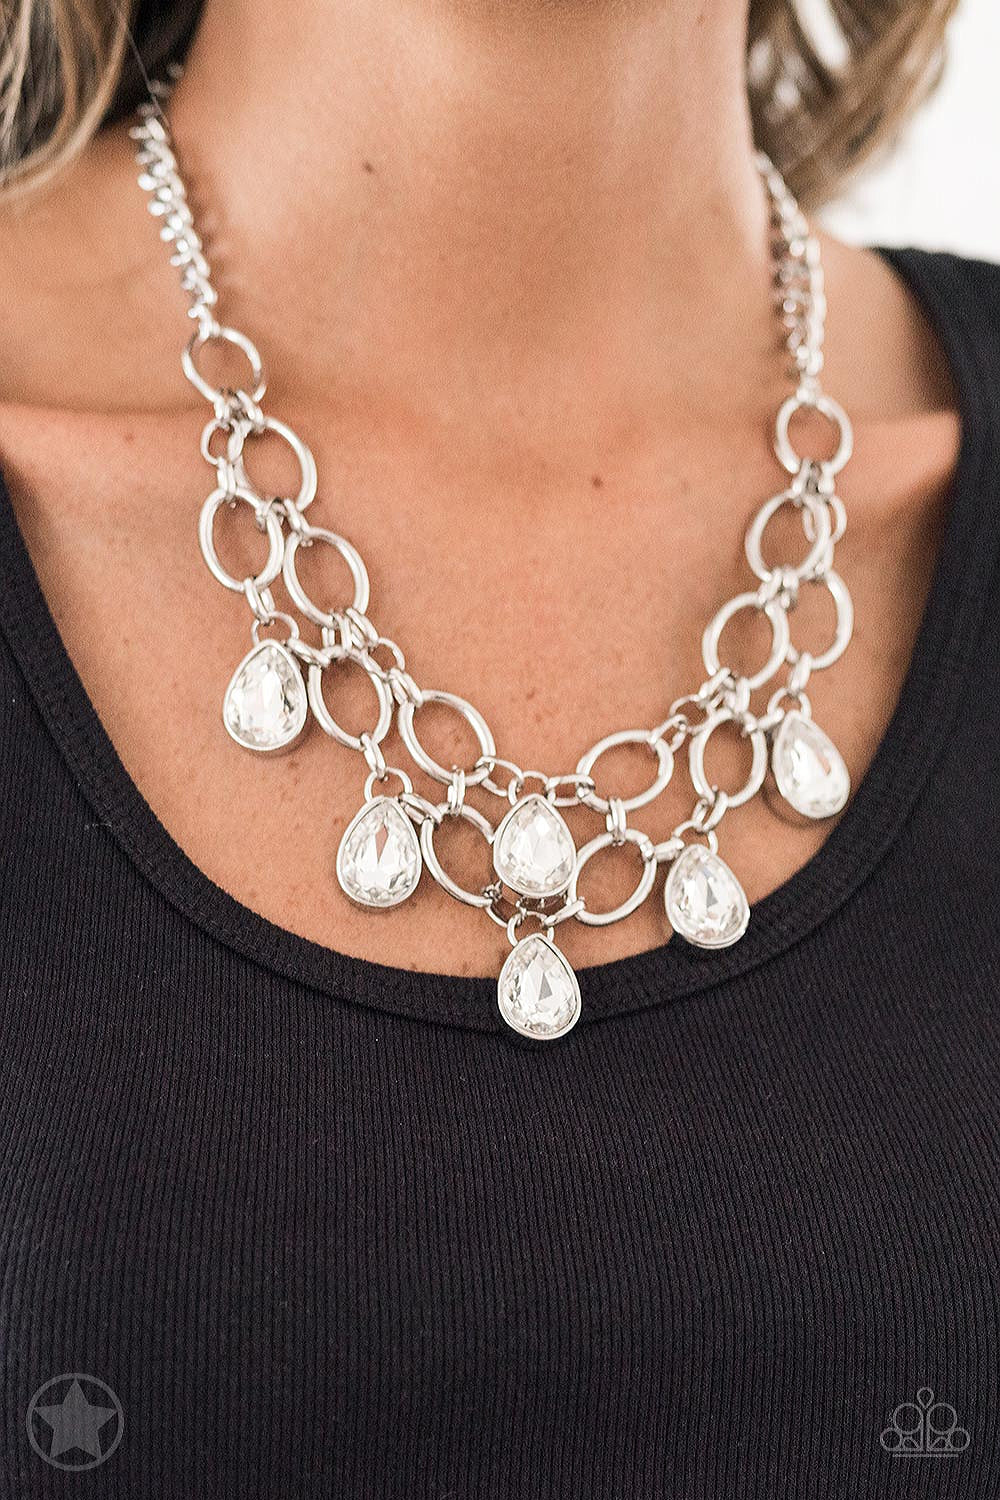 Show - Stopping Shimmer - Silver Fashion Necklace - Paparazzi Accessories - Two rows of silver chain layer below the collar for a fierce fashion. Glittery white teardrops gems hang from the glistening layers for a timeless shimmer to the show-stopping statement style. Necklace has an adjustable clasp closure.